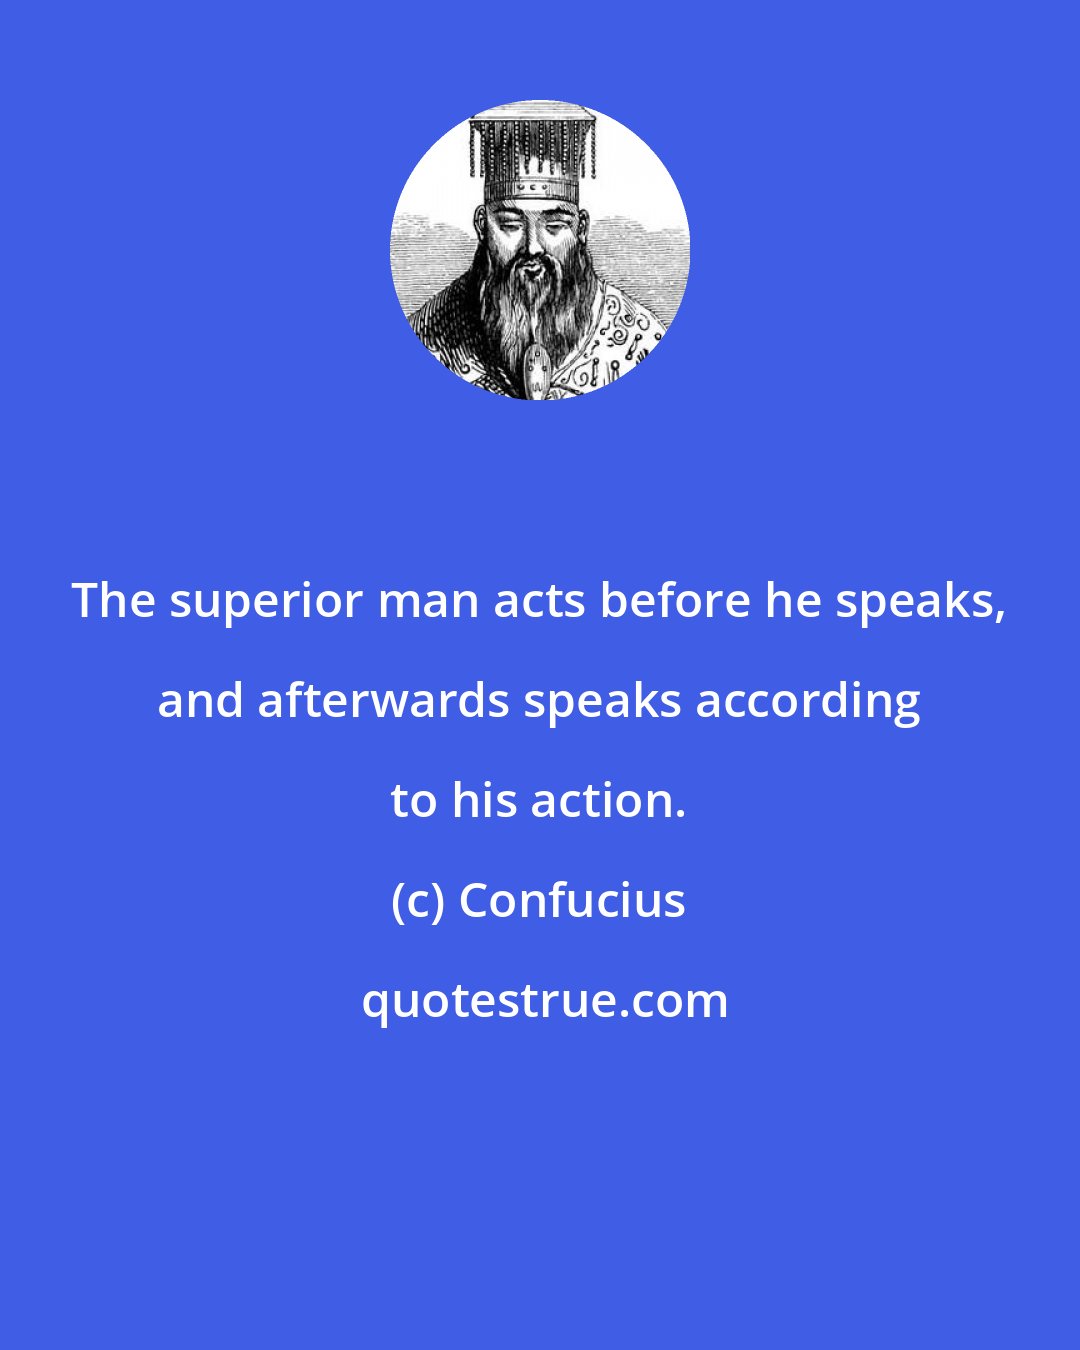 Confucius: The superior man acts before he speaks, and afterwards speaks according to his action.